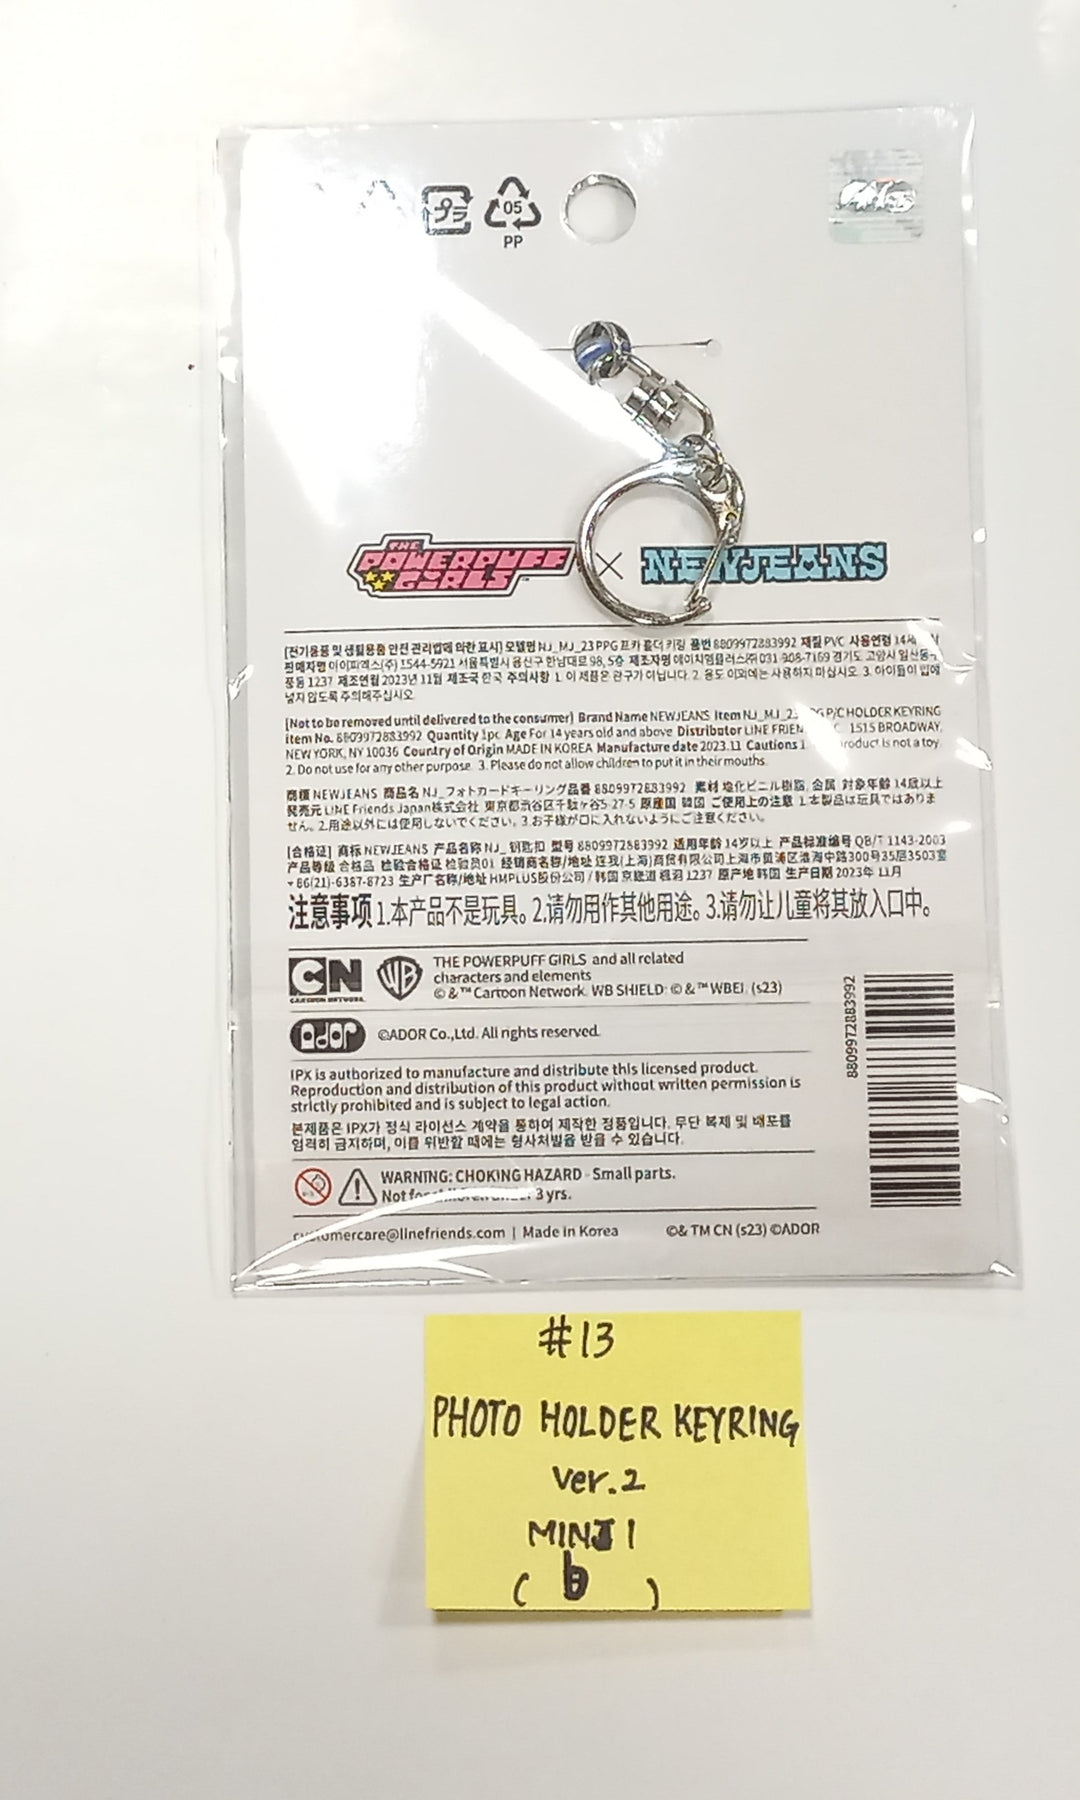 New Jeans - New Jeans x Line Friends Pop-Up Store Official MD [Acrylic Magnetic, Pin Badge, Photo Holder Keyring, Mouse Pad, Plastic File] [24.1.24]